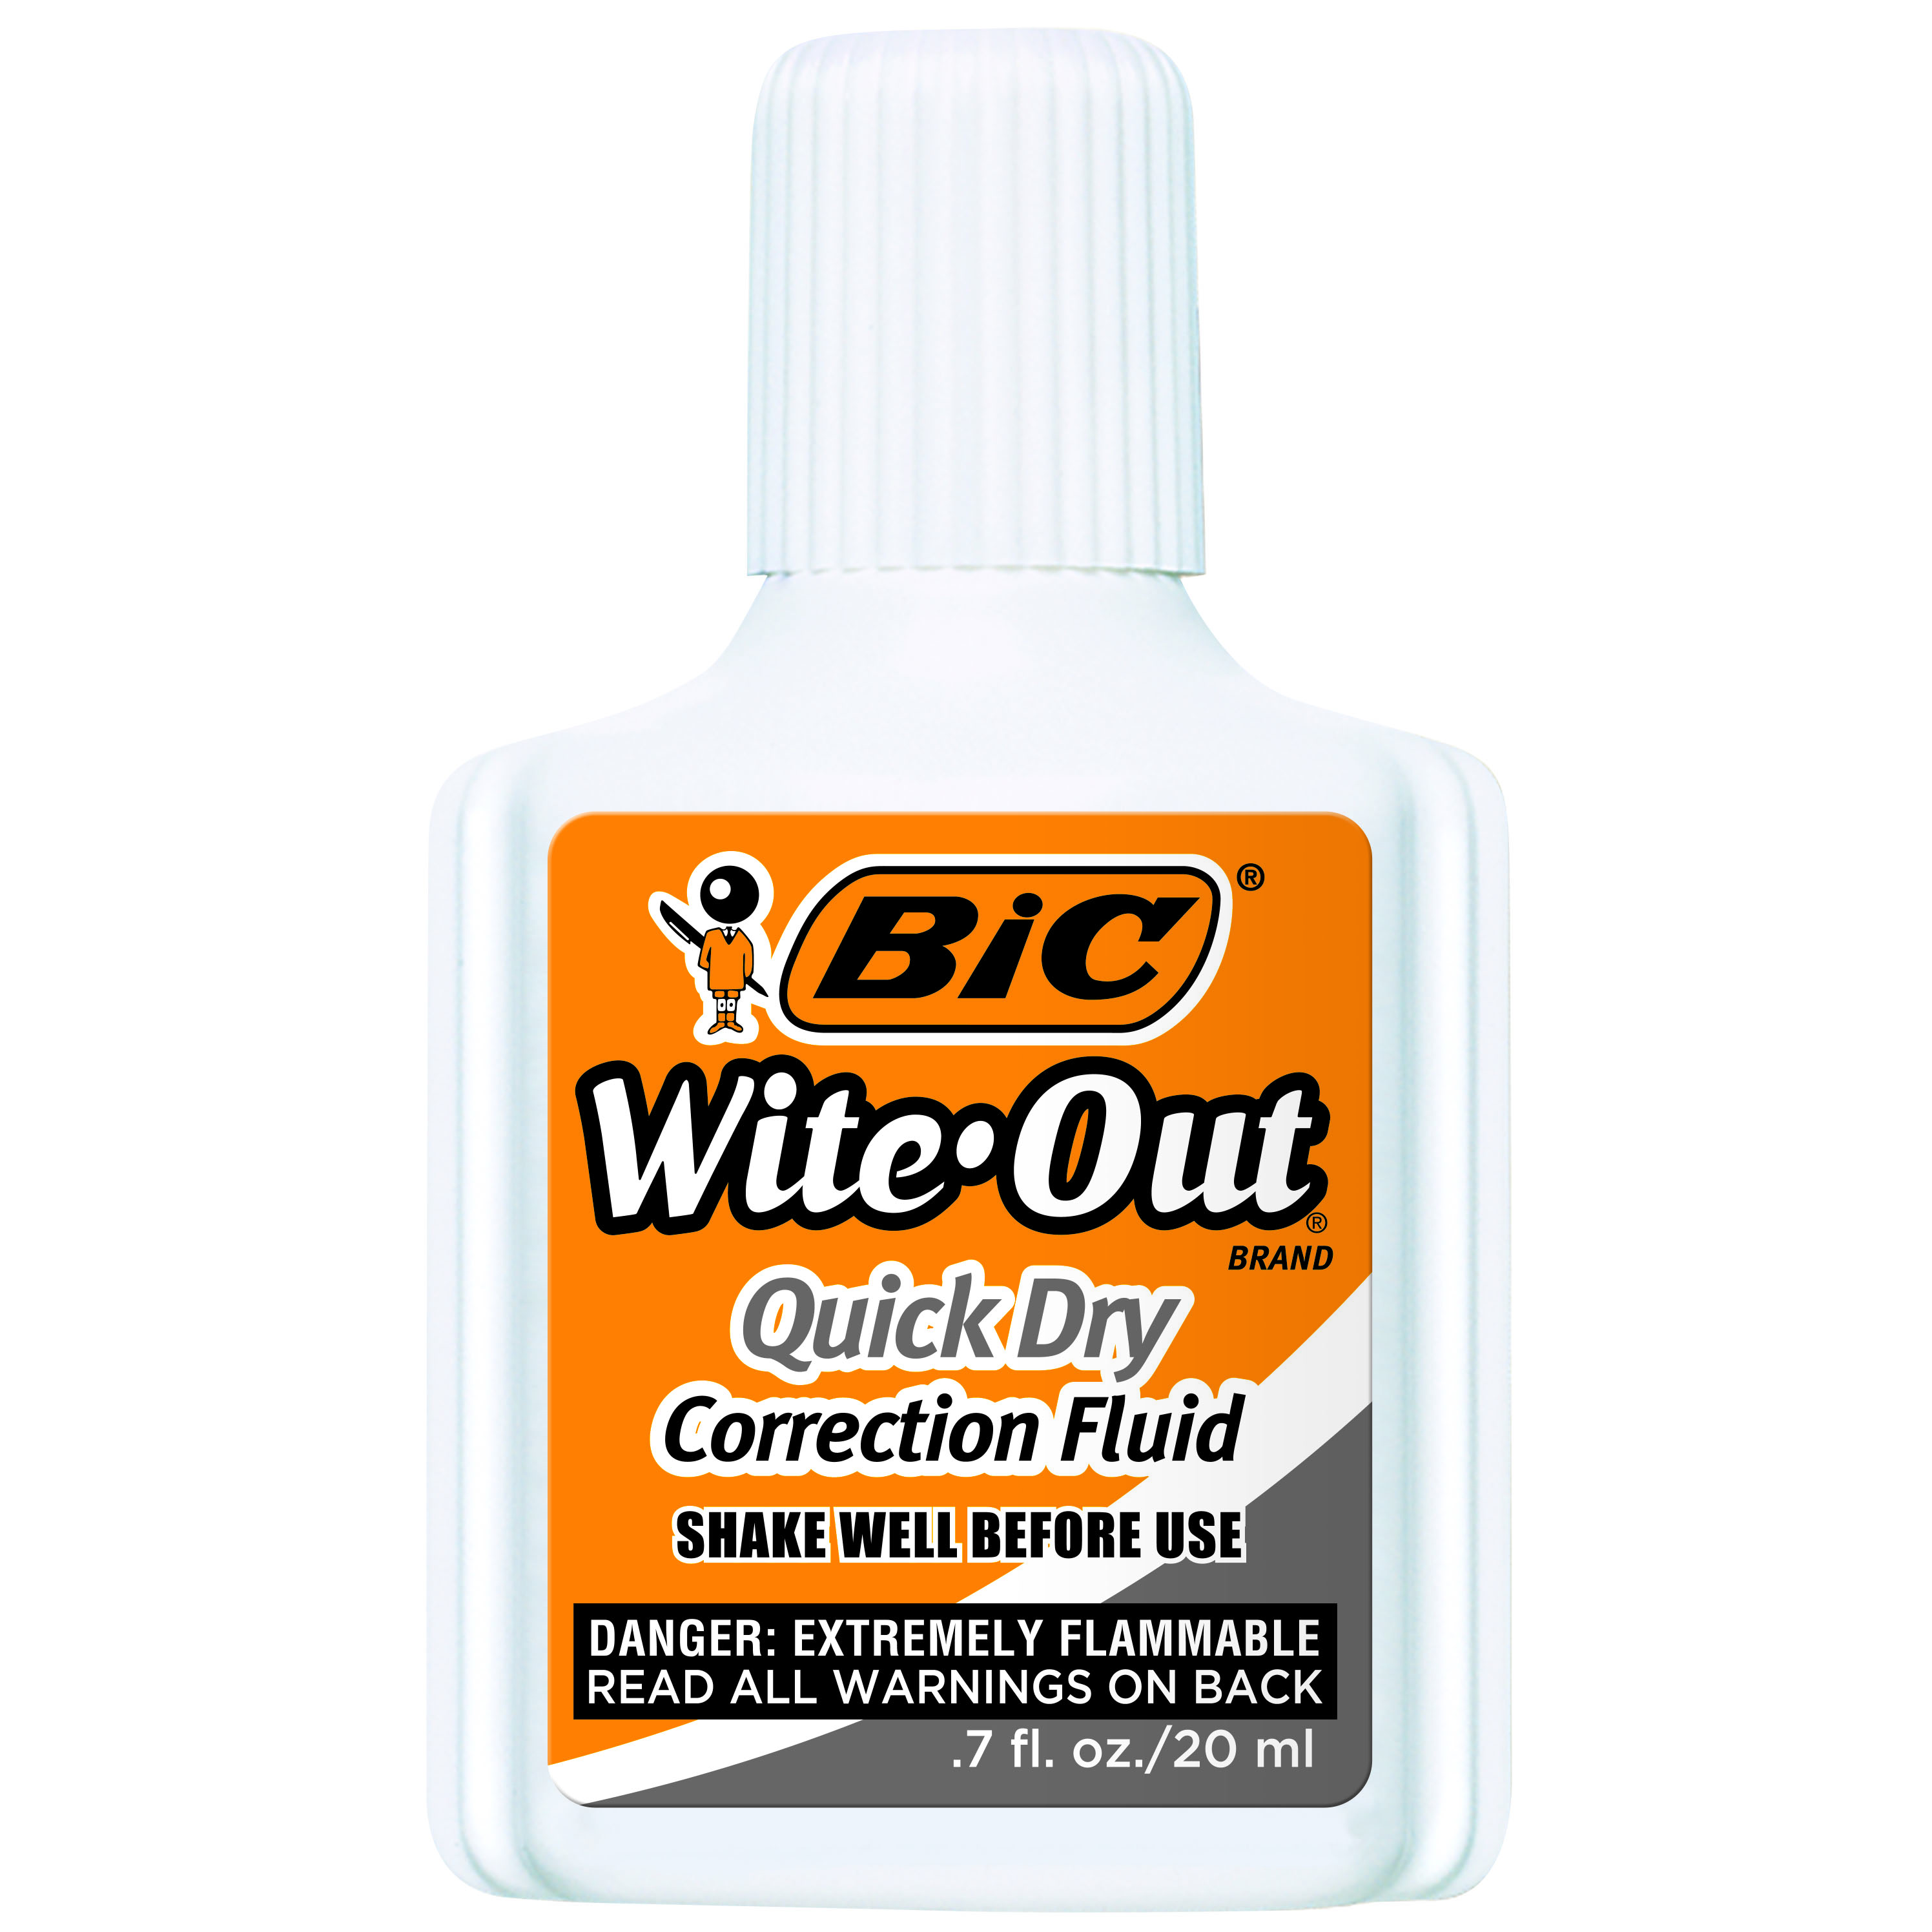 BIC Wite-Out Brand Quick Dry Correction Fluid, 20 ml, White, 3 Count - image 4 of 10